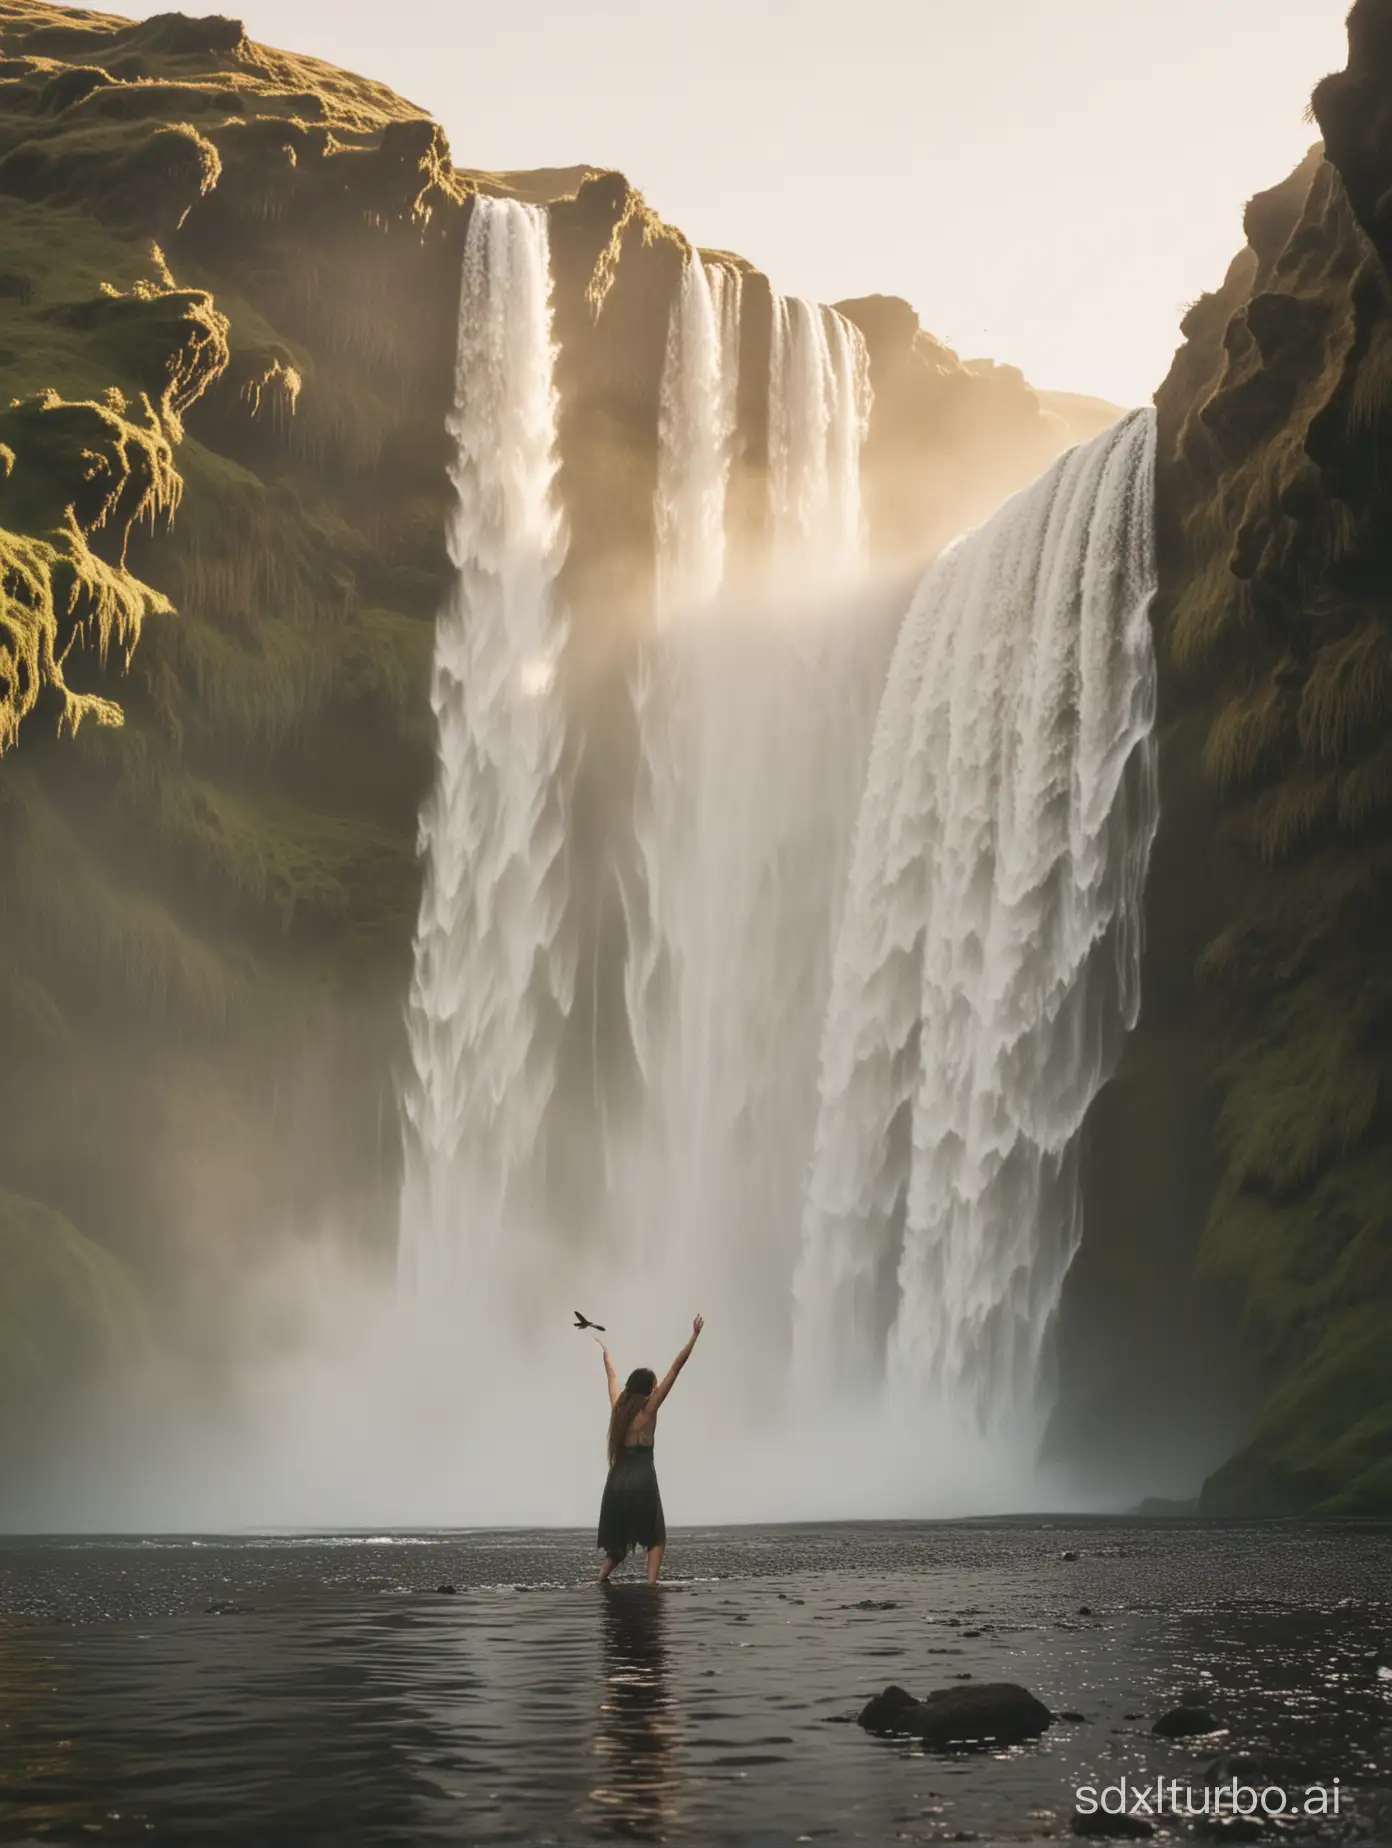 Extreme close-up photo of Skógafoss waterfall during golden hour. The waterfall is powerful, with a large volume of water cascading down a cliff into a pool below. There is a small bird flying in the mist rising from the waterfall. A woman far away taking bath in the pool bellow.Grainy film vintage look aesthetics.